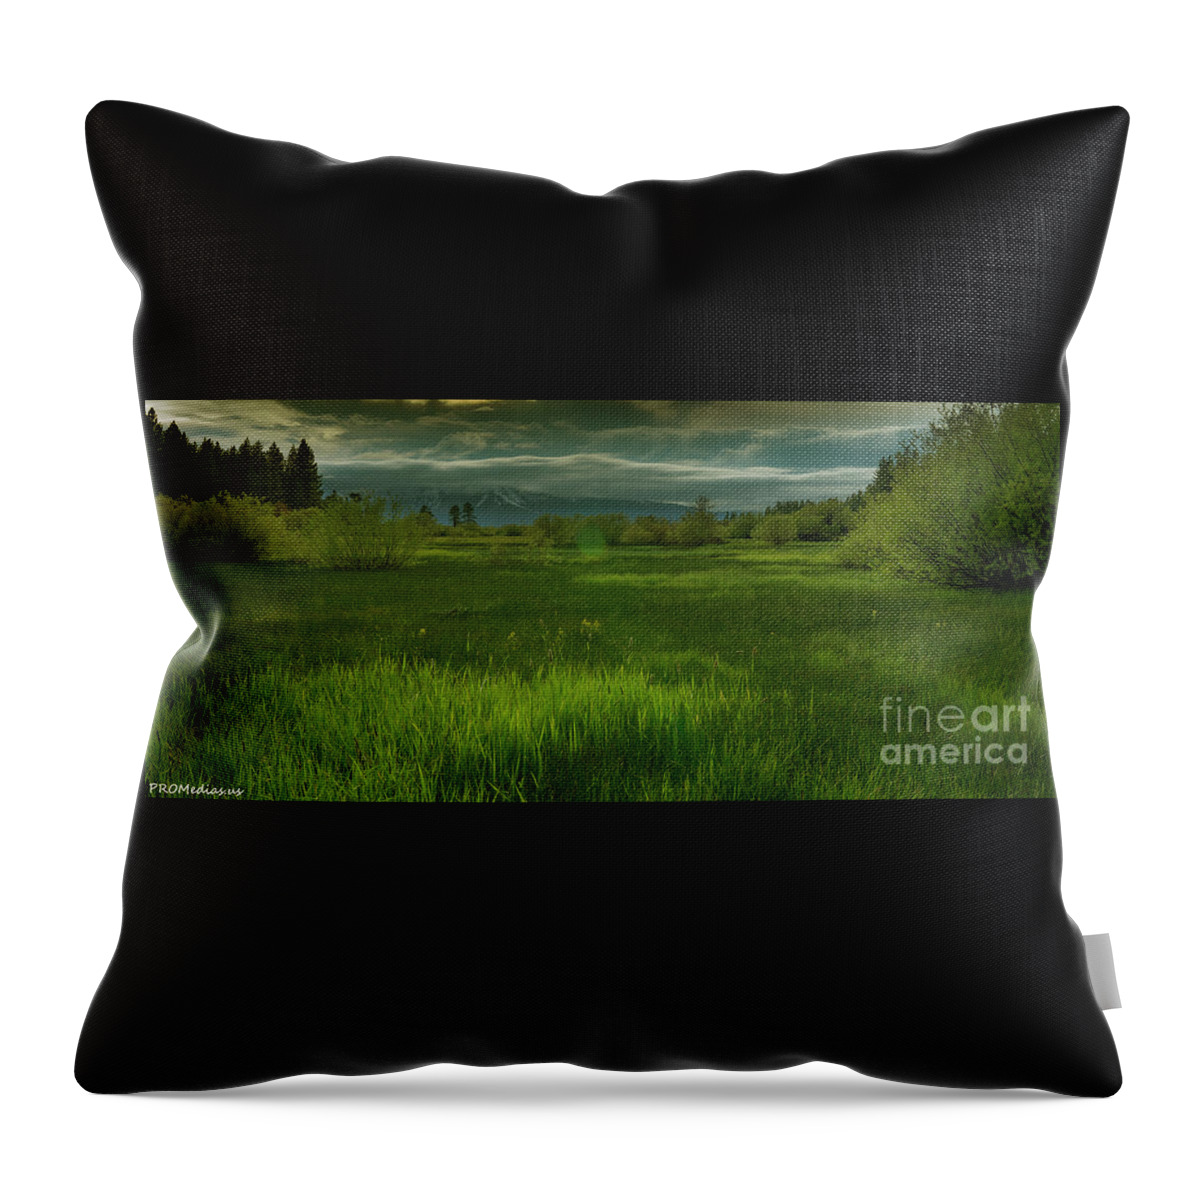 Mount Tallac California Throw Pillow featuring the photograph just after the storm, El Dorado National Forest, California by PROMedias US